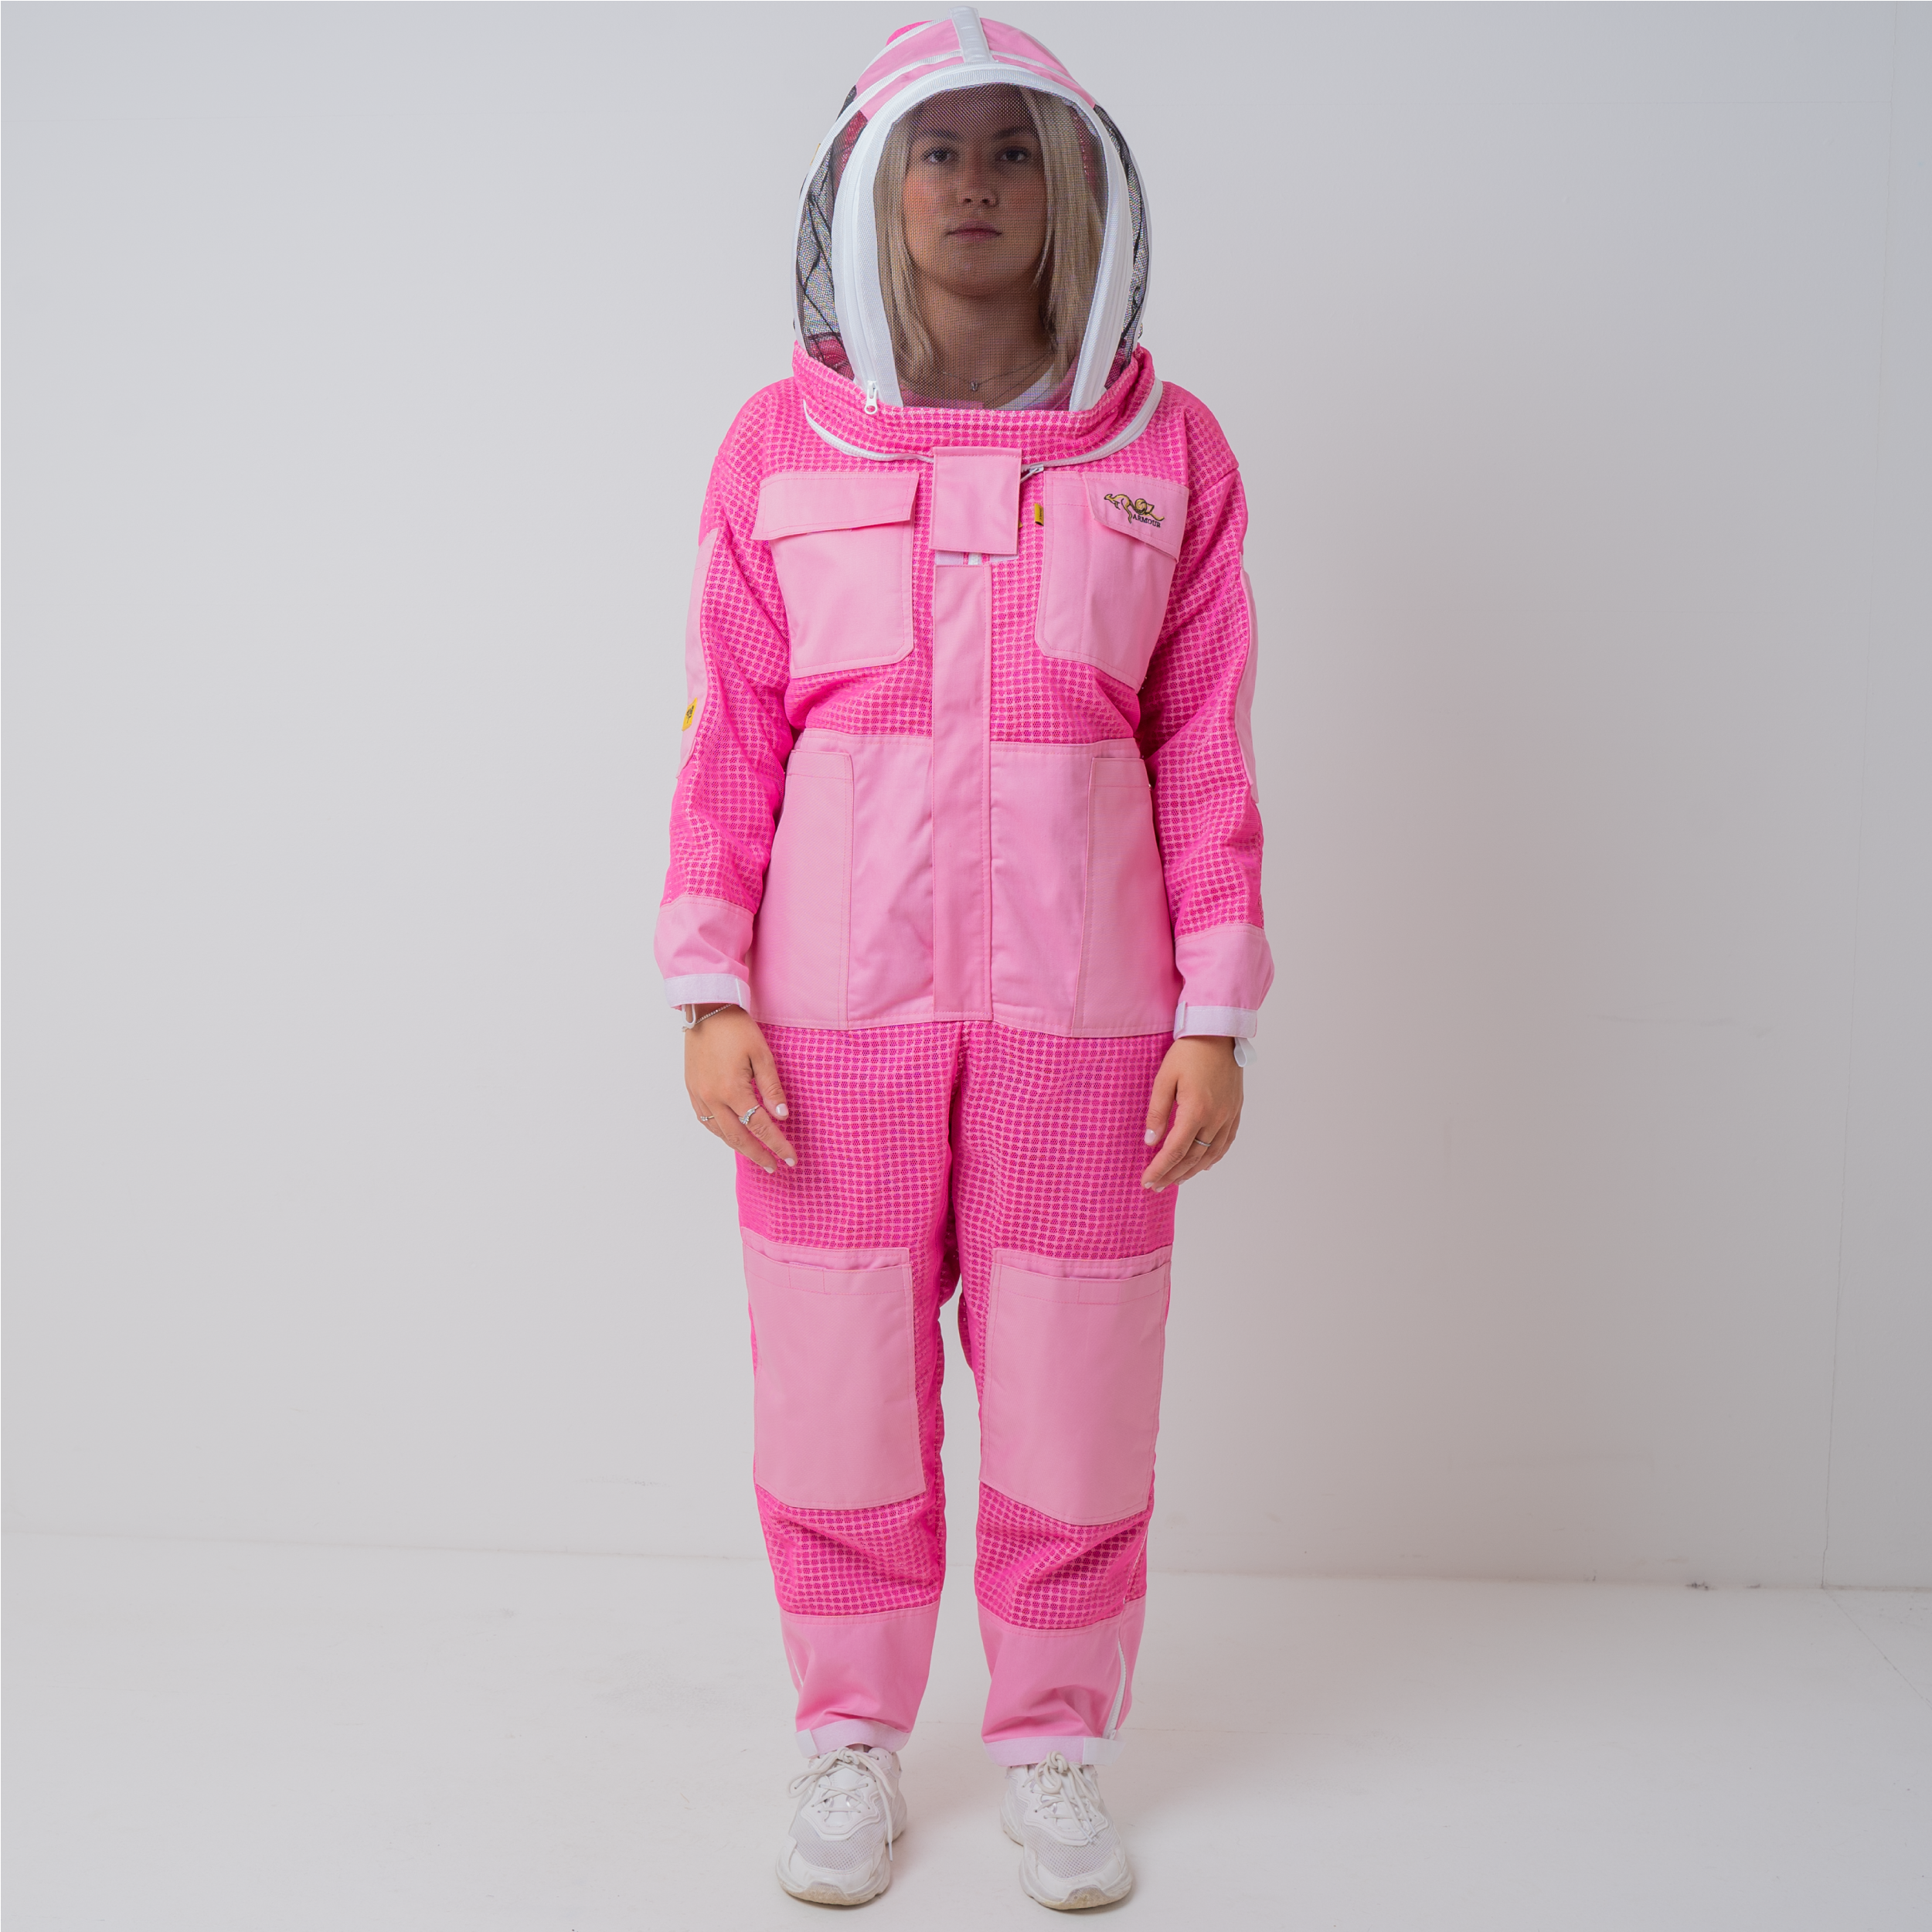 Pink Beekeeping Suit with 3 Layer Mesh, Fencing Veil - Front Side